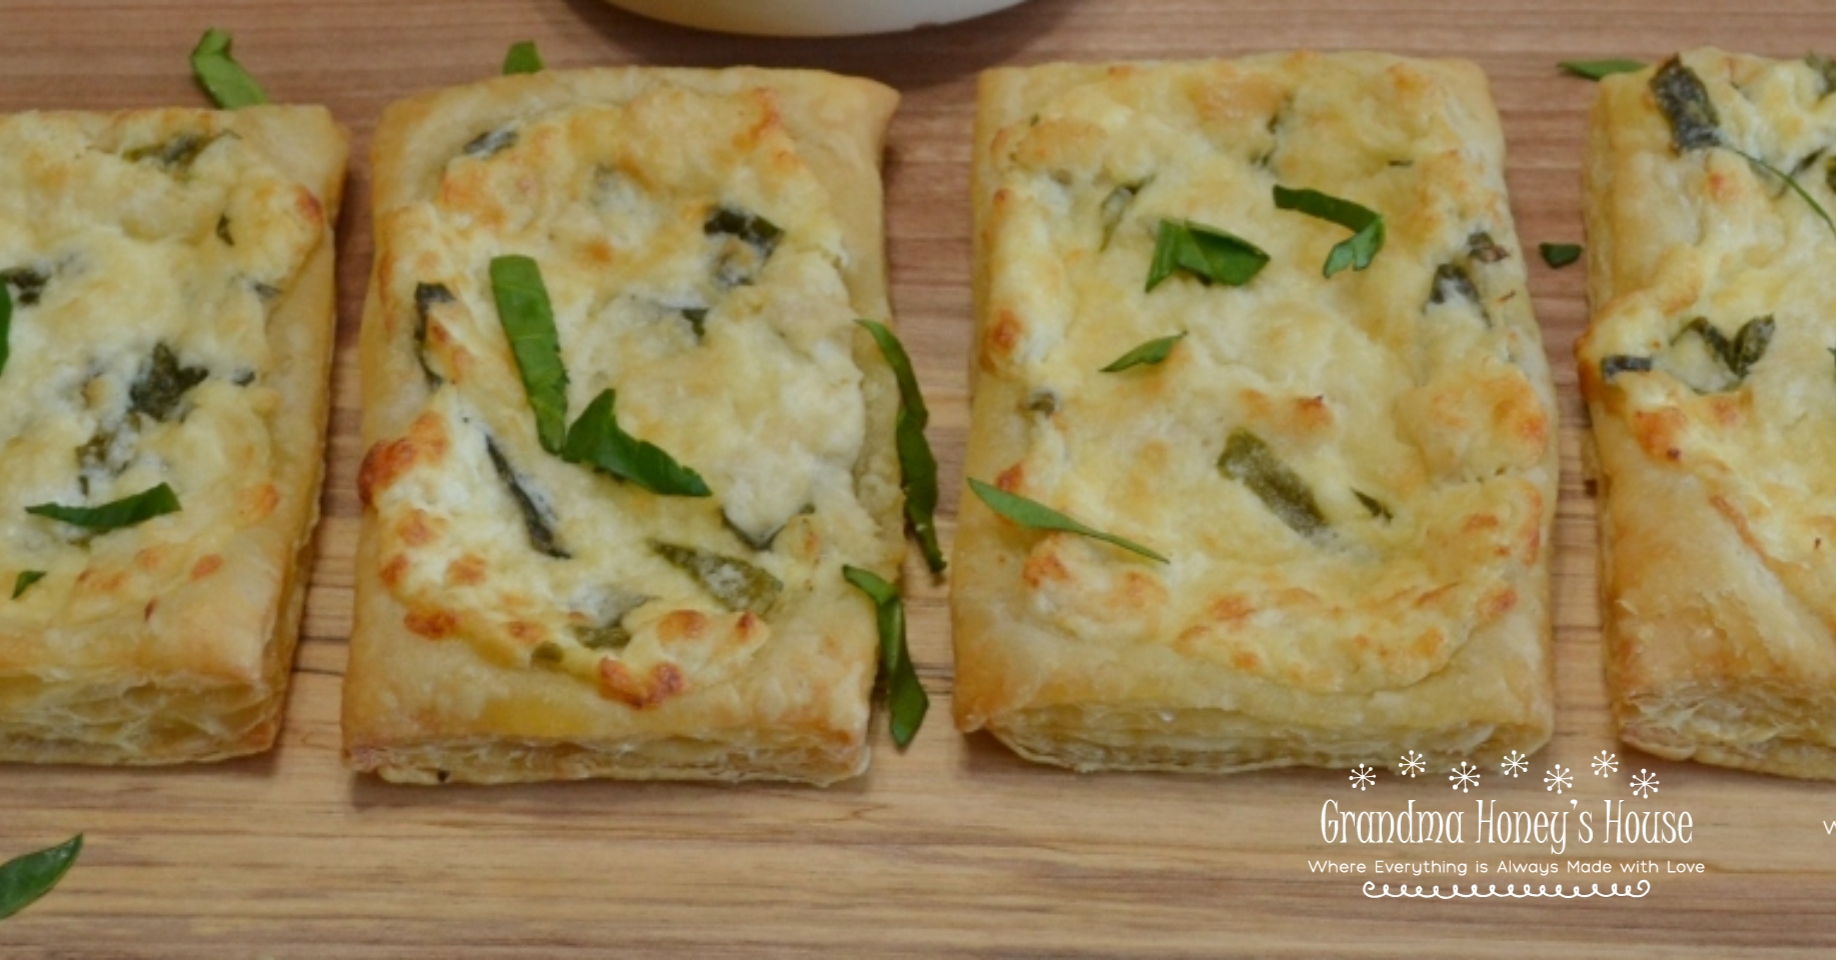 Chicken-Spinach-Fontina Mini Tarts are a delicious appetizer made with puff pastry and a chicken and cheese filling.